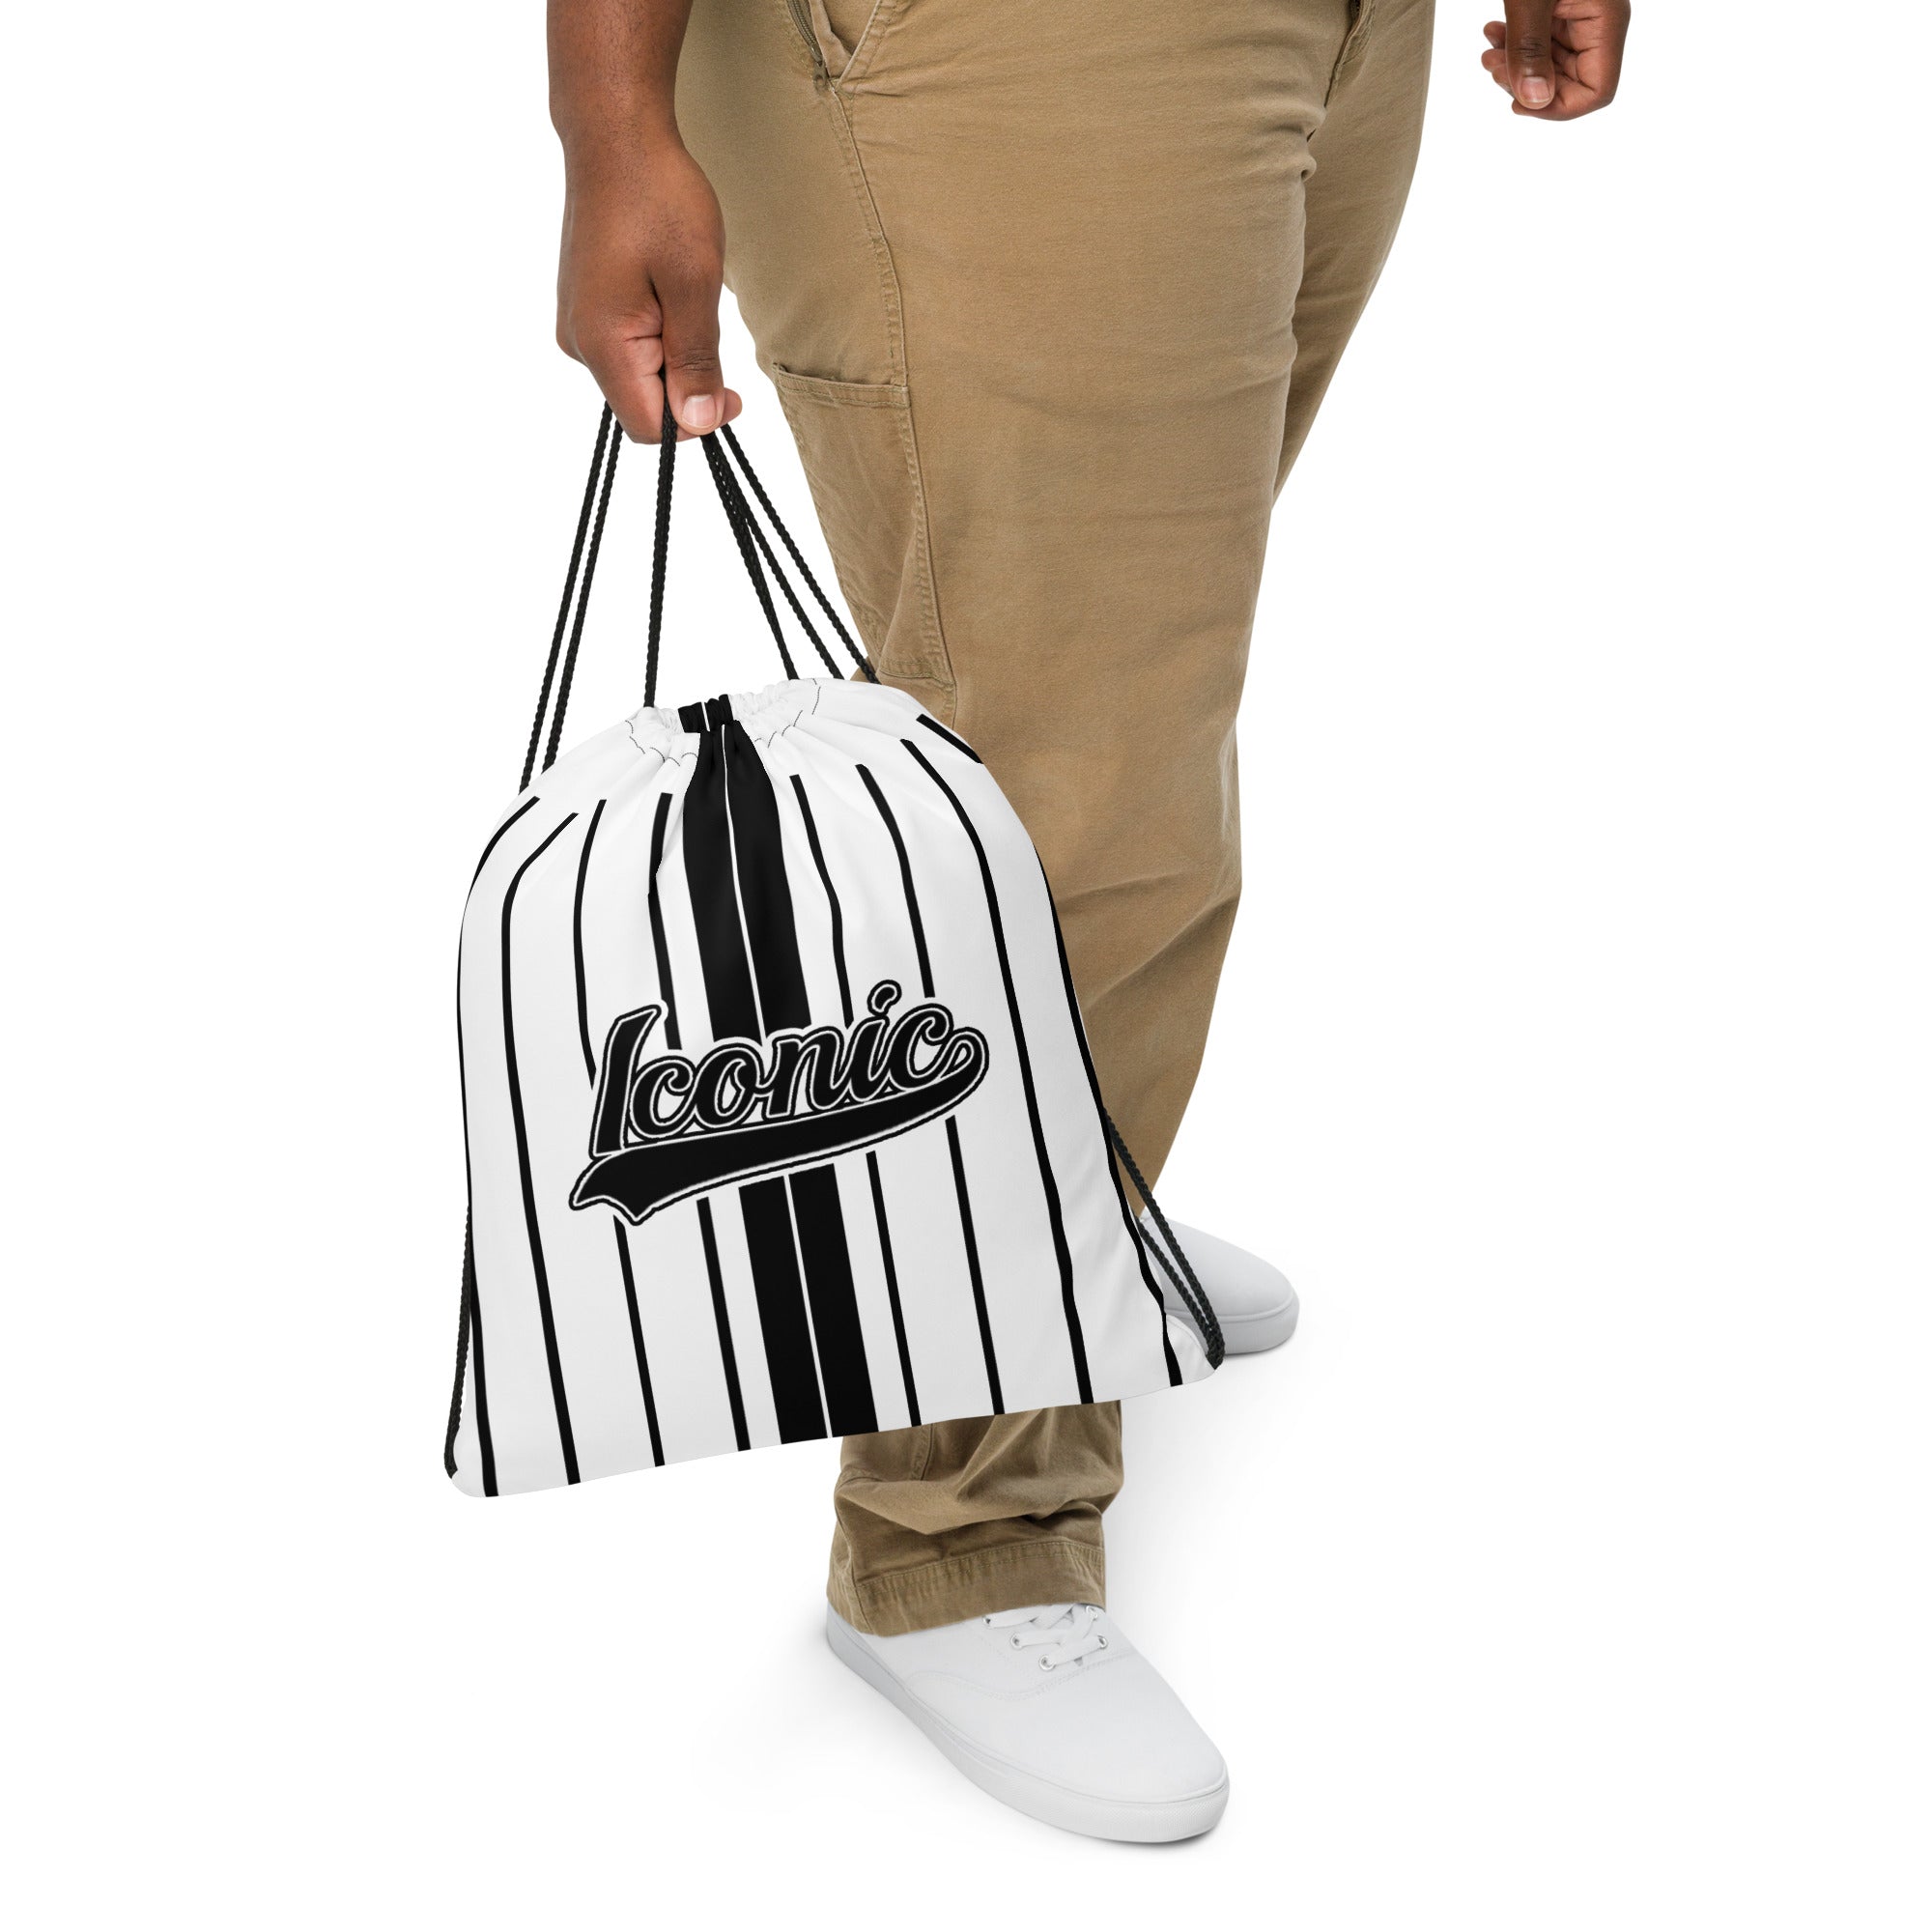 ROYAL Team Iconic. Toy Bag Pinstripe White and Blk